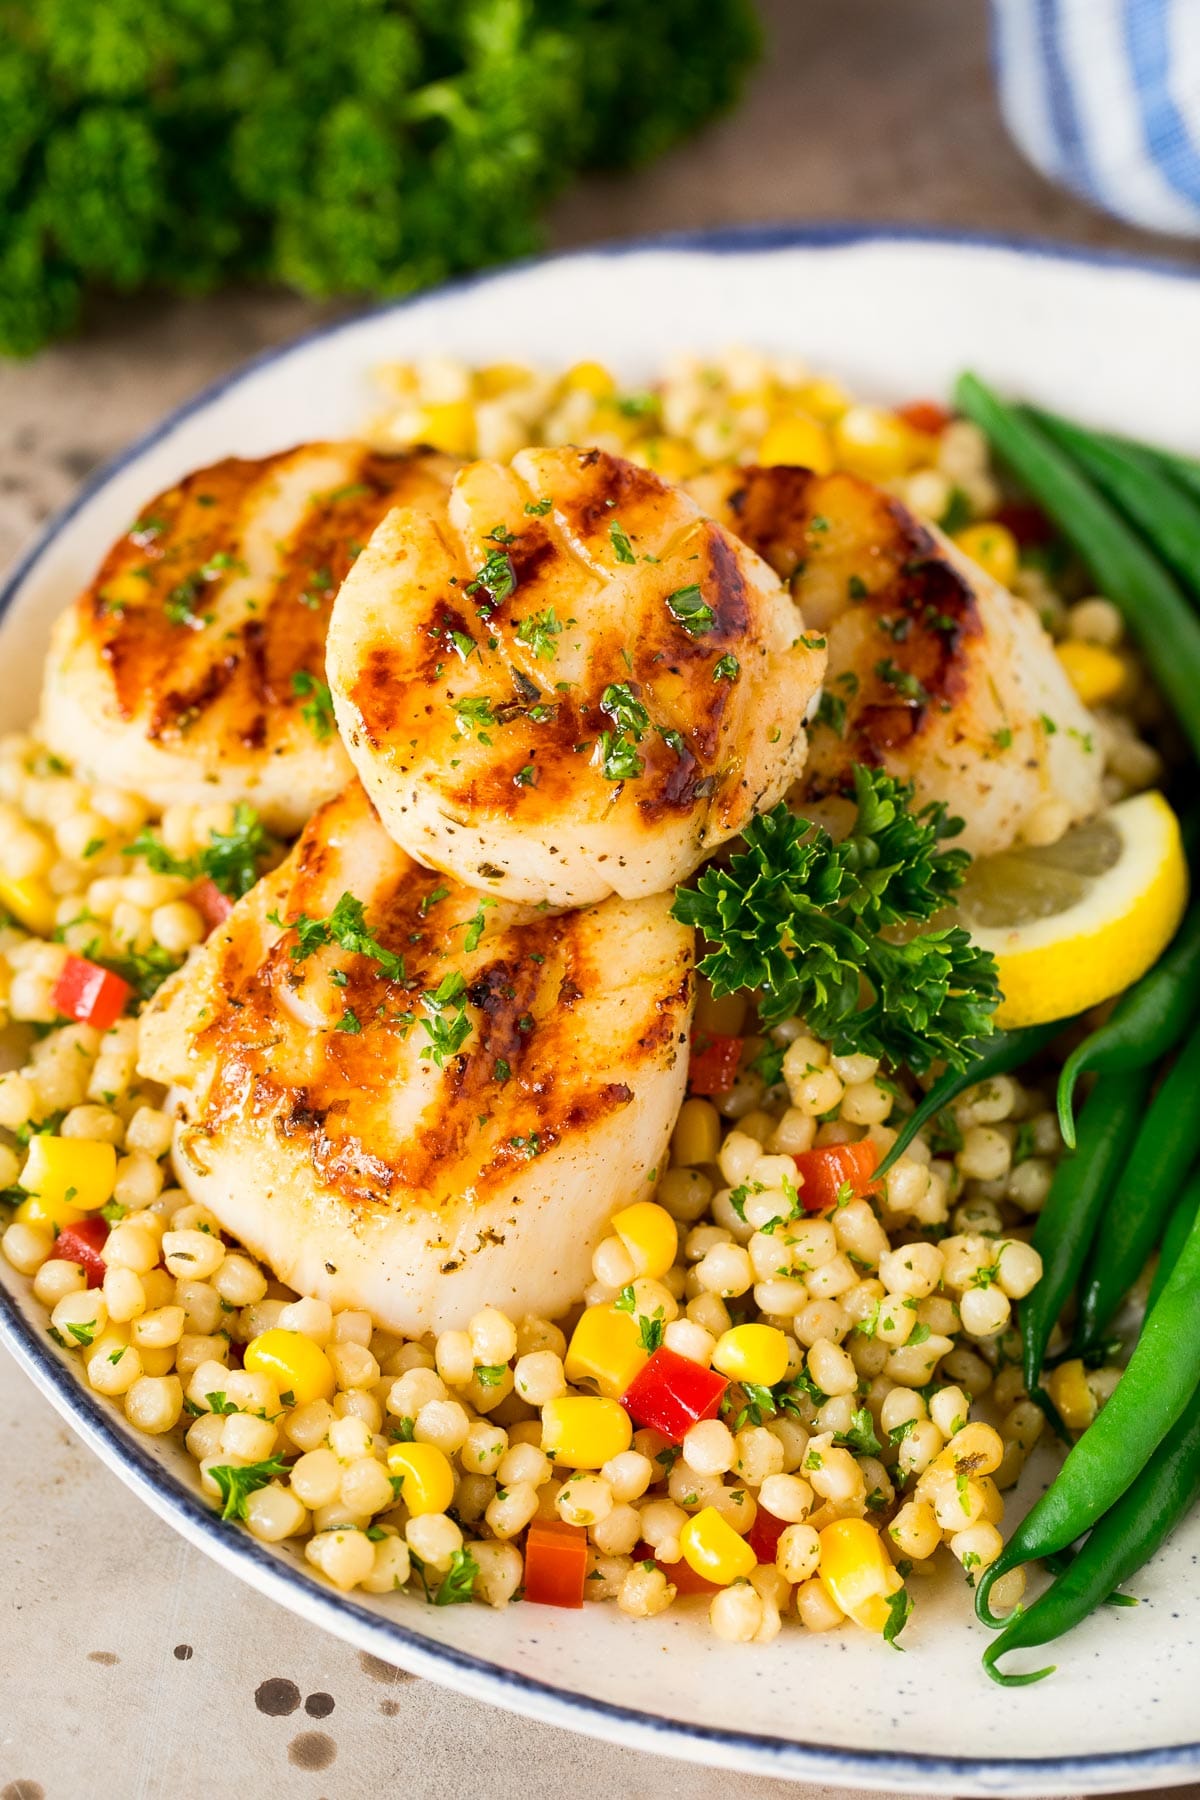 Grilled scallops served with couscous and green beans.